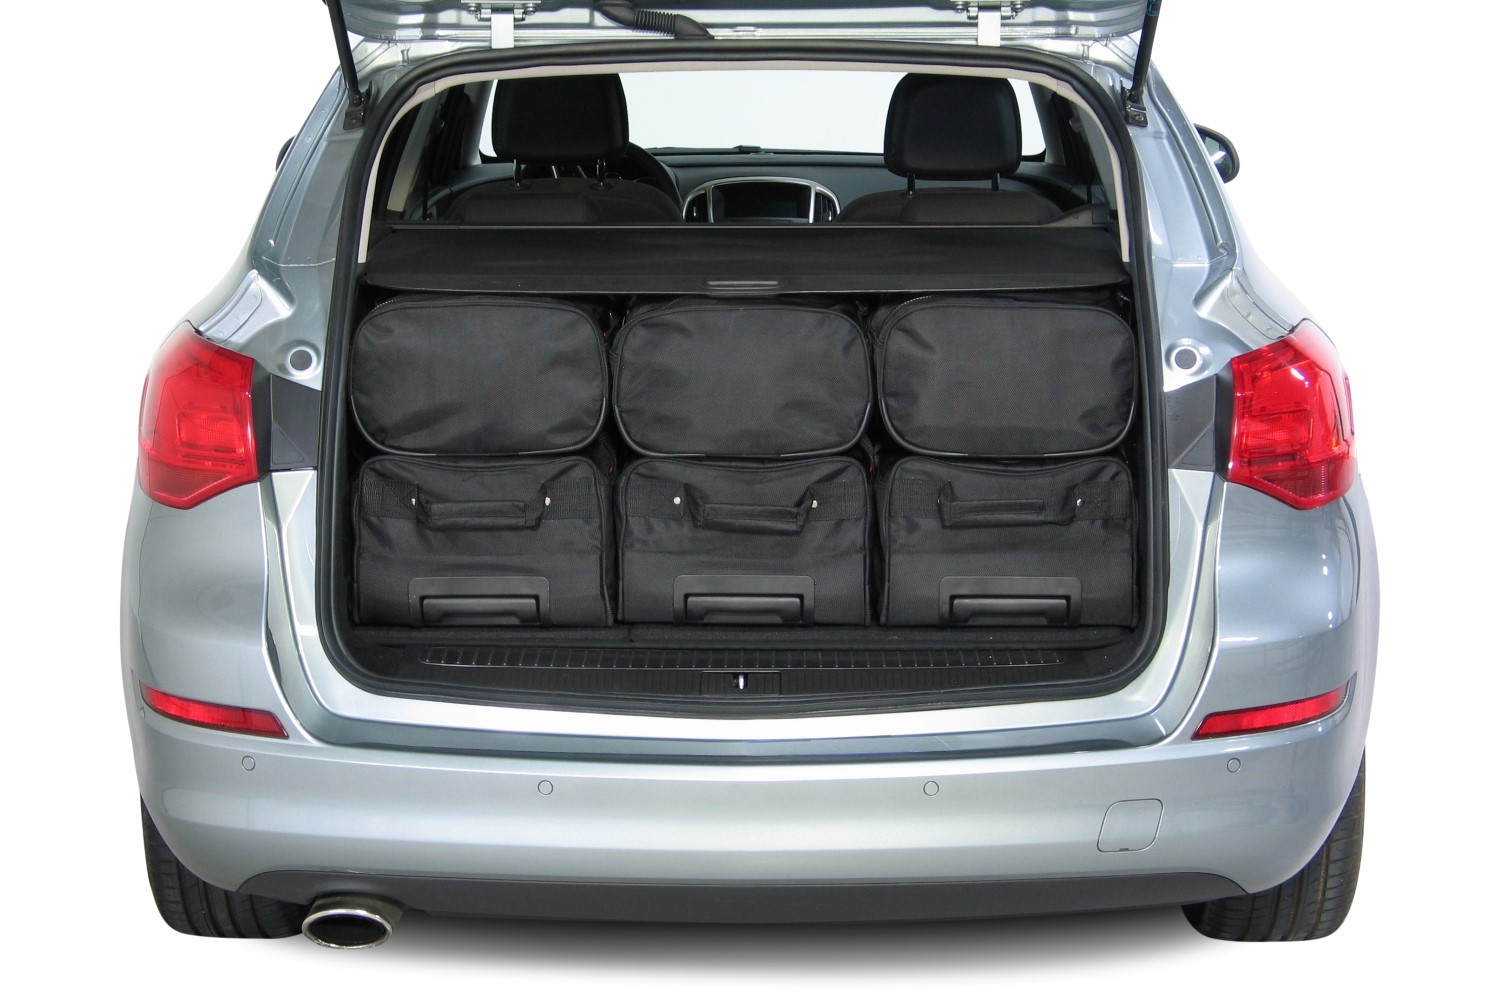 https://www.car-bags.com/images/stories/virtuemart/product/o10201s-opel-astra-sports-tourer-10-car-bags-4.jpg